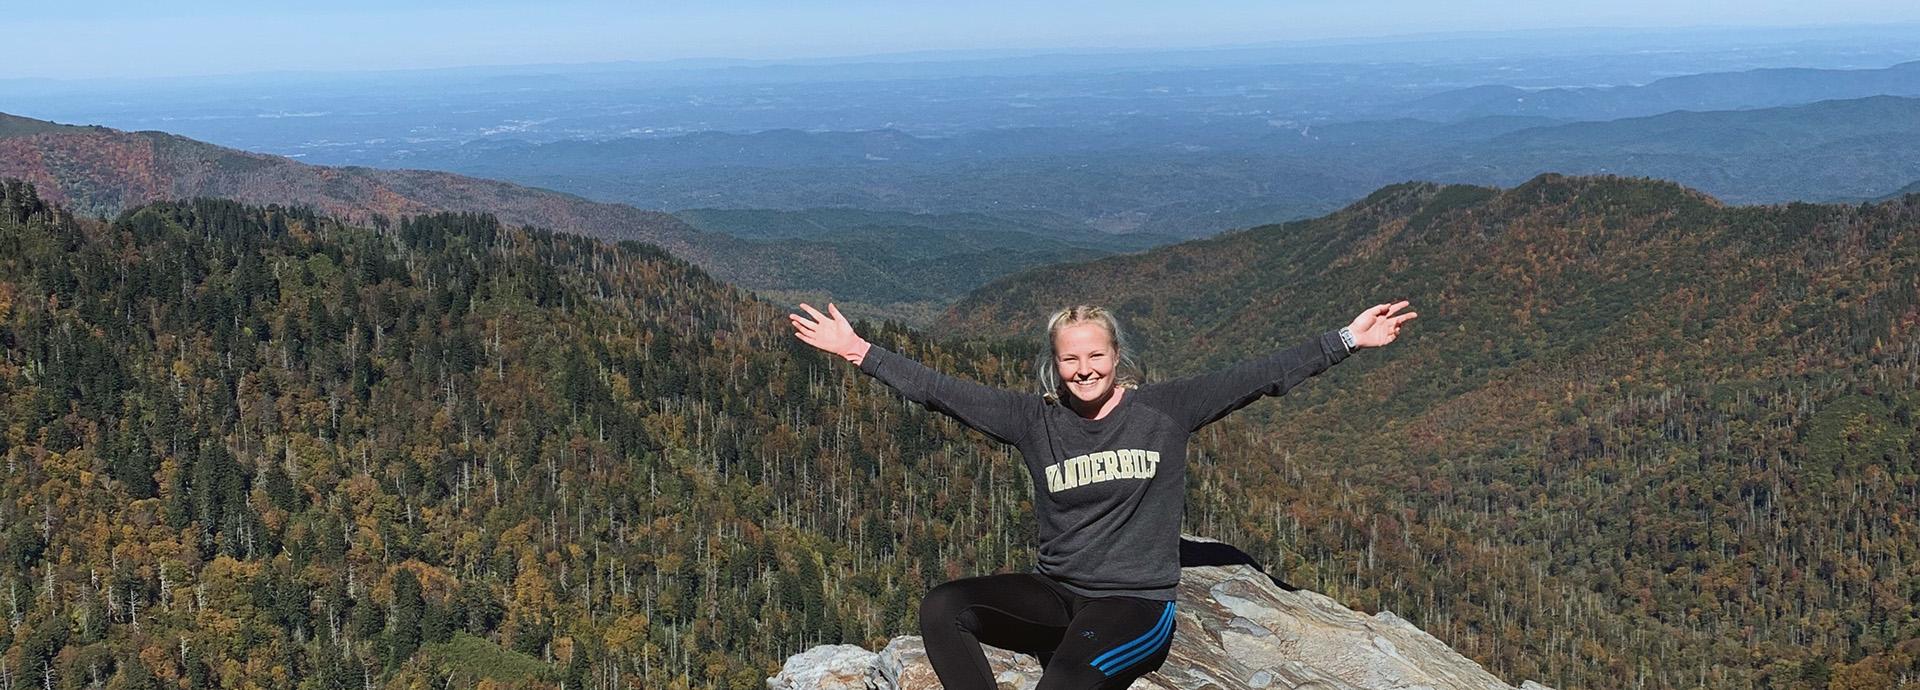 Fulbright Finland grantee Agneetta Moisio sitting on top of a mountain with her arms spread on her side. She is wearing her university's, Vanderbilt University, college shirt and smiling to the camera.